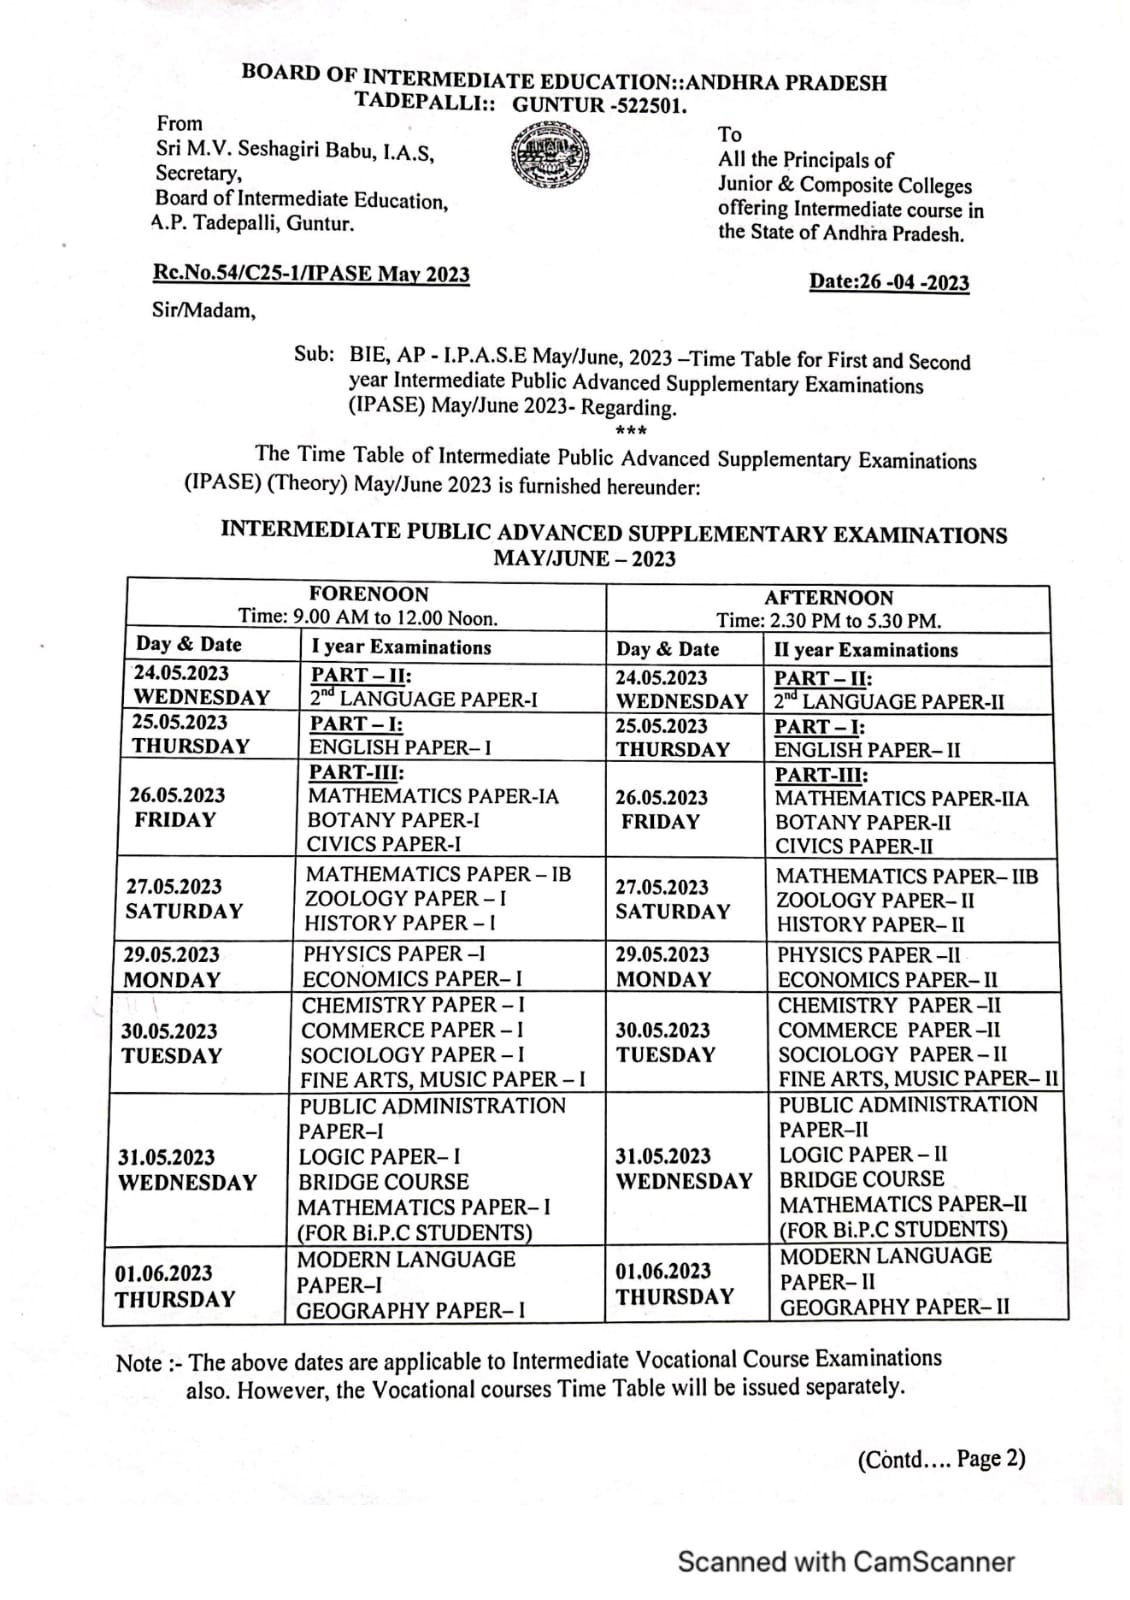 BIE AP Inter Supplementary Exams Time Table 2023 IPASE May June 2023 Schedule